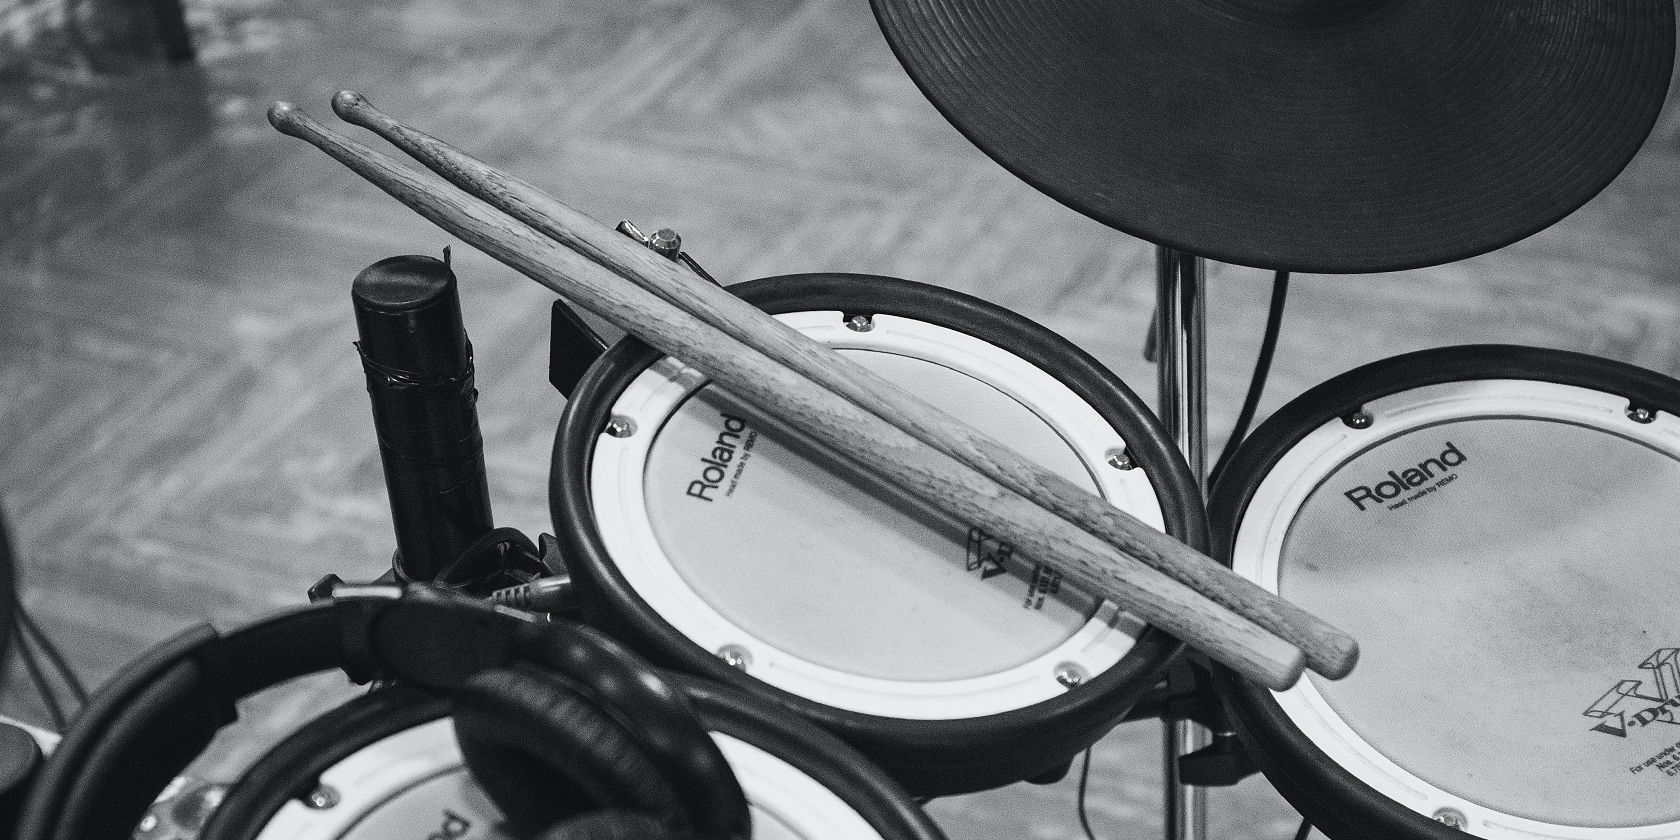 black and white image of an electric drum pad and drumsticks